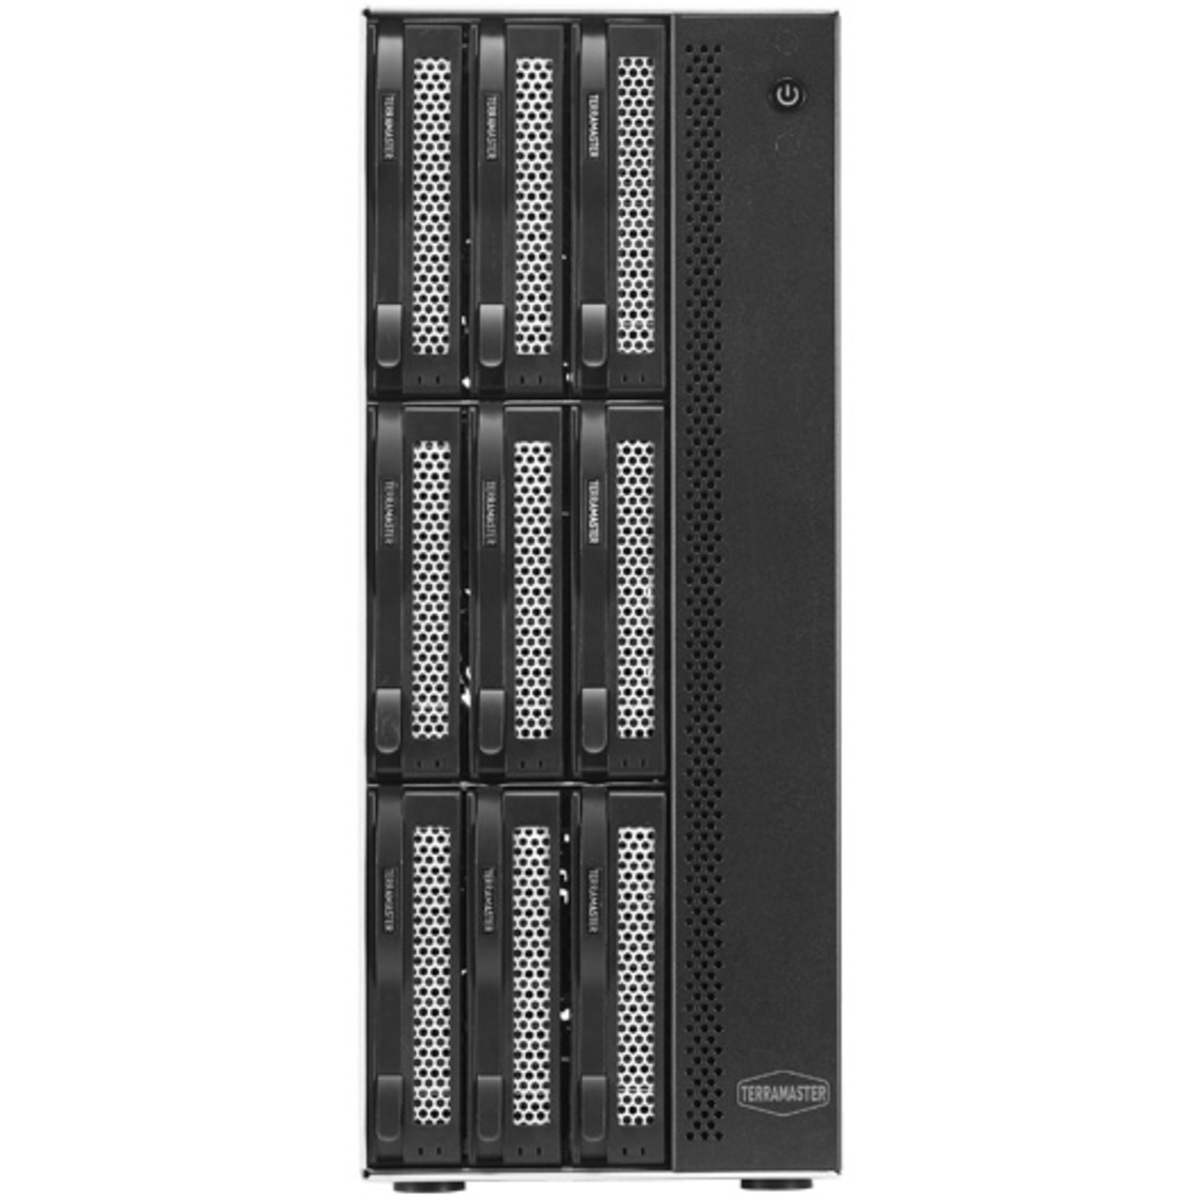 TerraMaster T9-423 90tb 9-Bay Desktop Multimedia / Power User / Business NAS - Network Attached Storage Device 5x18tb Seagate IronWolf Pro ST18000NT001 3.5 7200rpm SATA 6Gb/s HDD NAS Class Drives Installed - Burn-In Tested T9-423